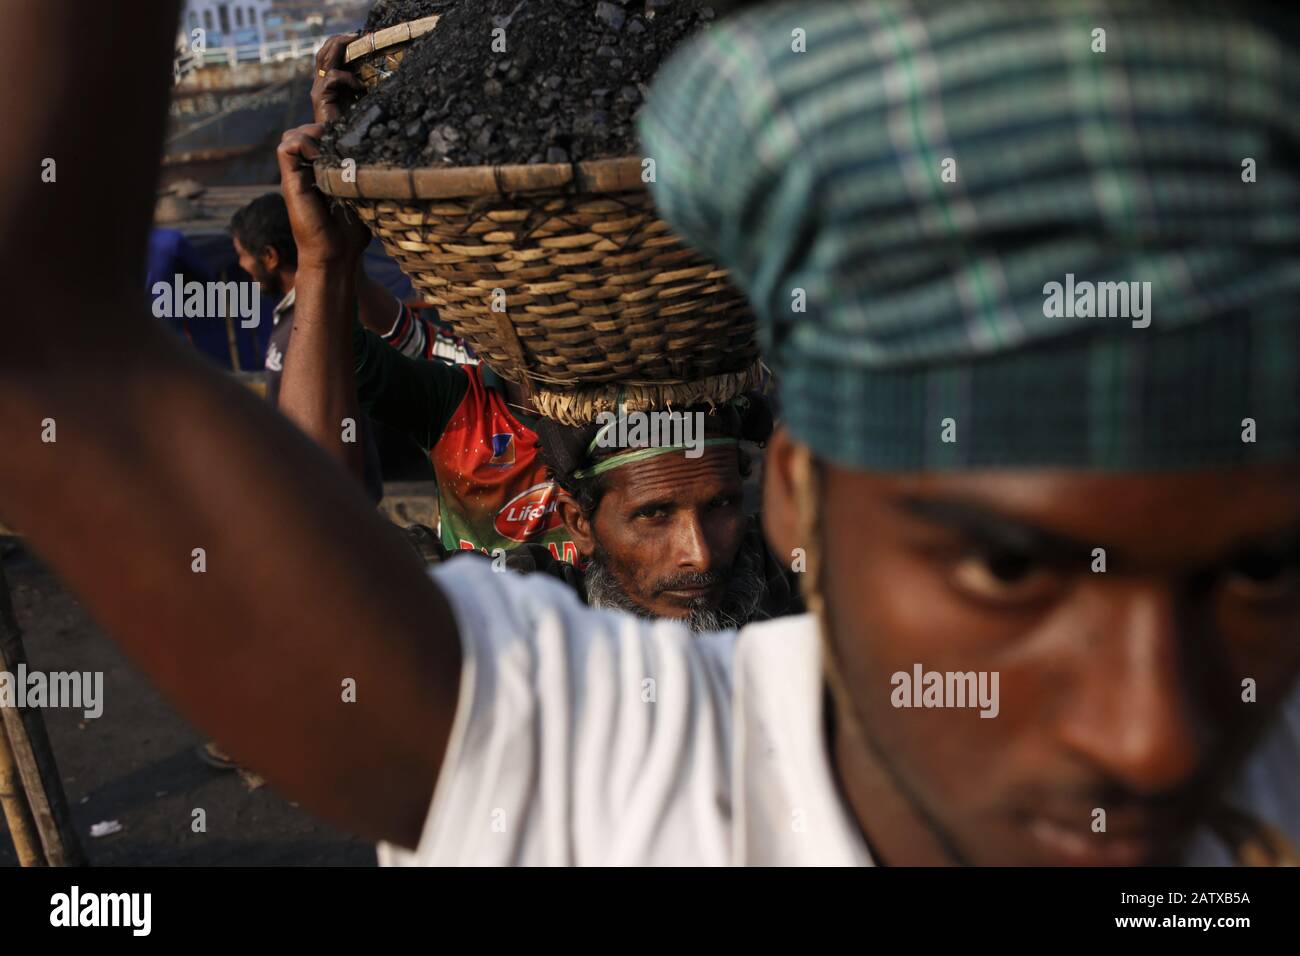 Dhaka, Bangladesh. 5th Feb, 2020. Laborers unload coal from a barge in a basket on their head at the bank of the Turag River. Credit: MD Mehedi Hasan/ZUMA Wire/Alamy Live News Stock Photo